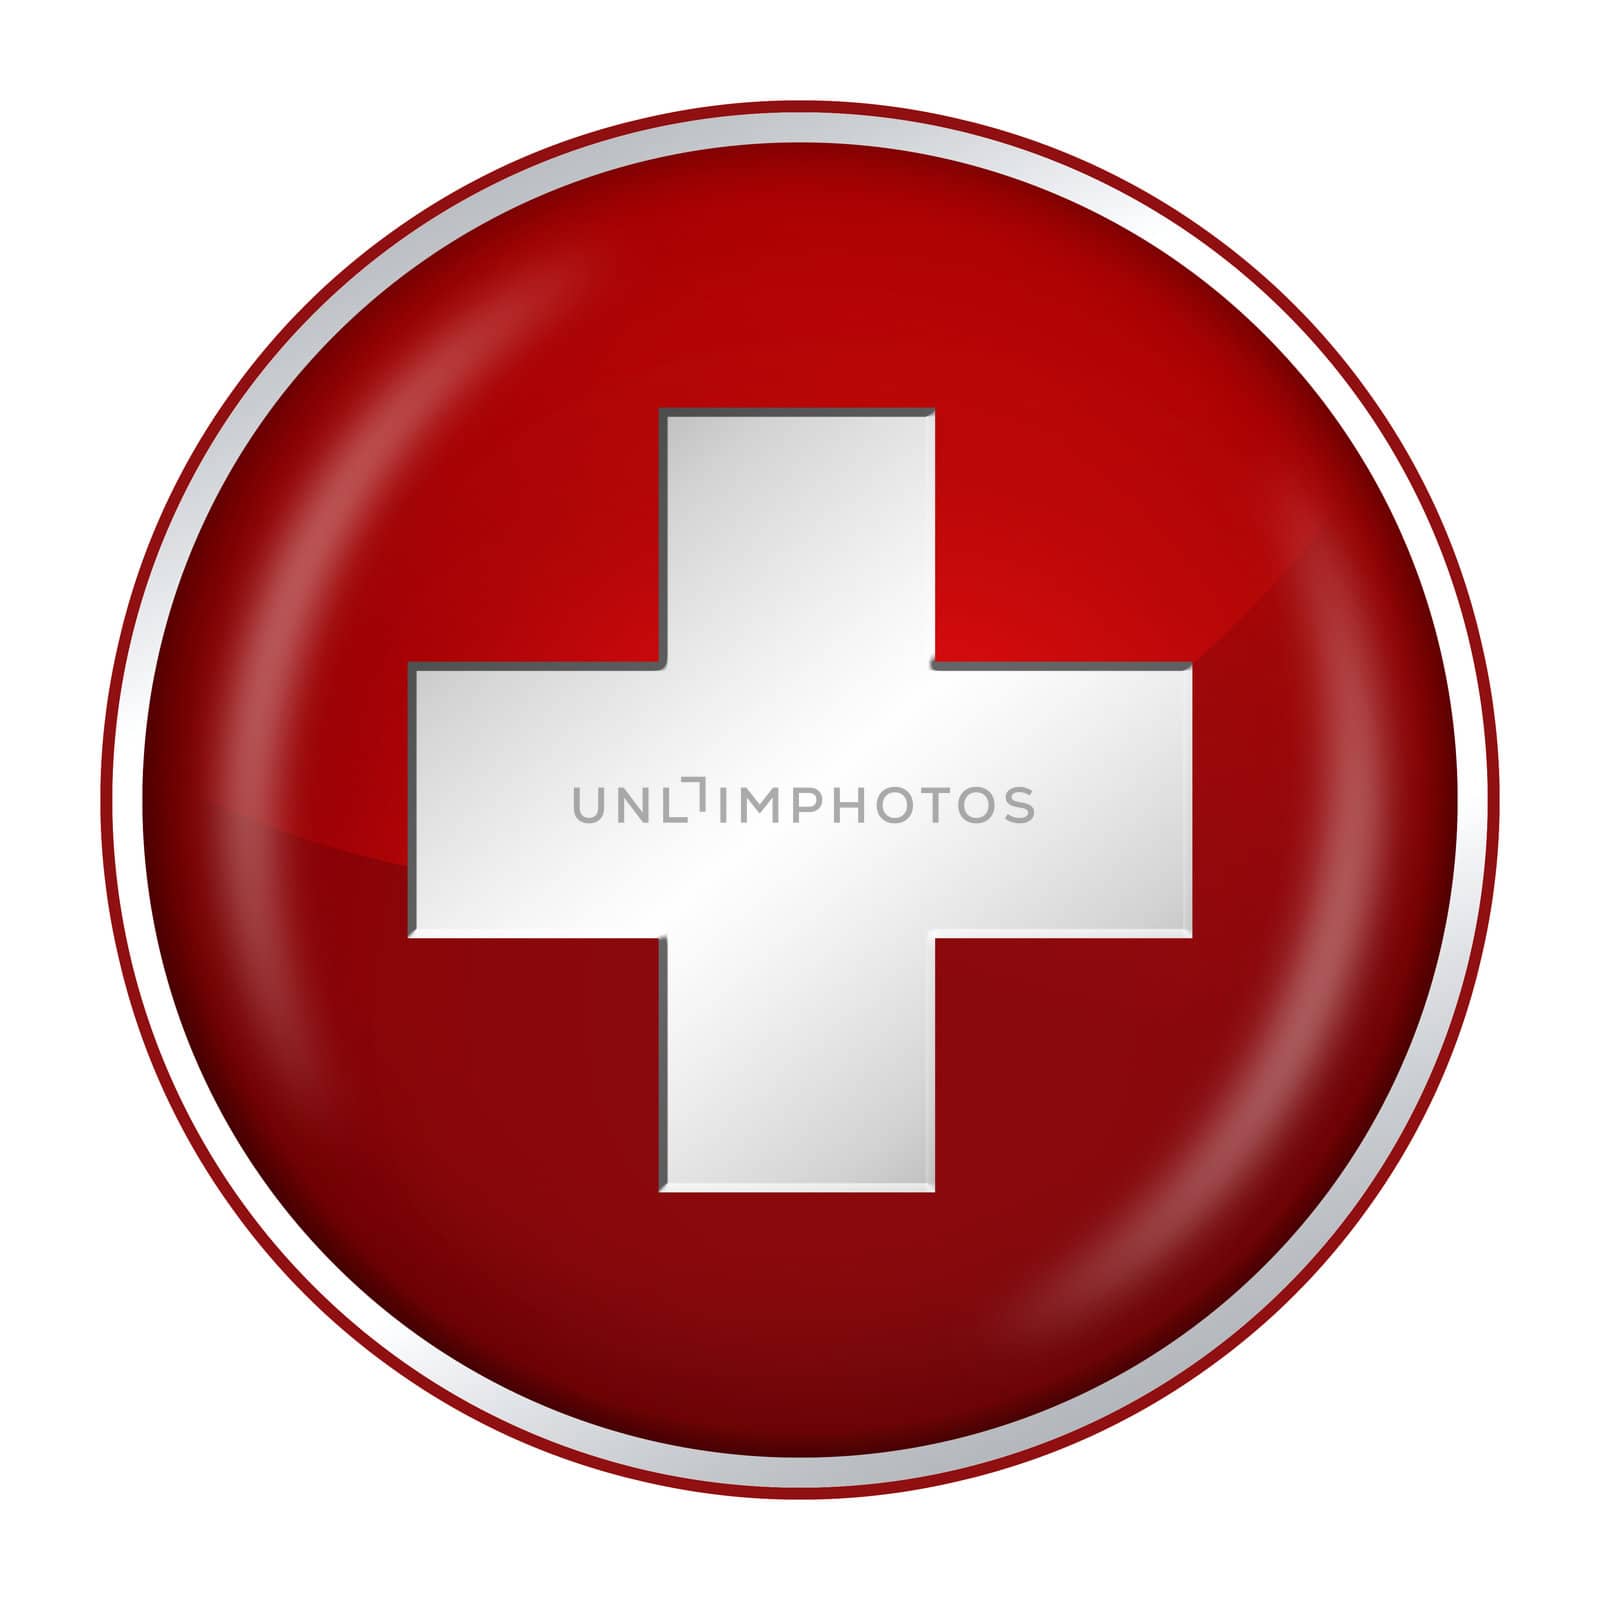 swiss flag button by Hasenonkel